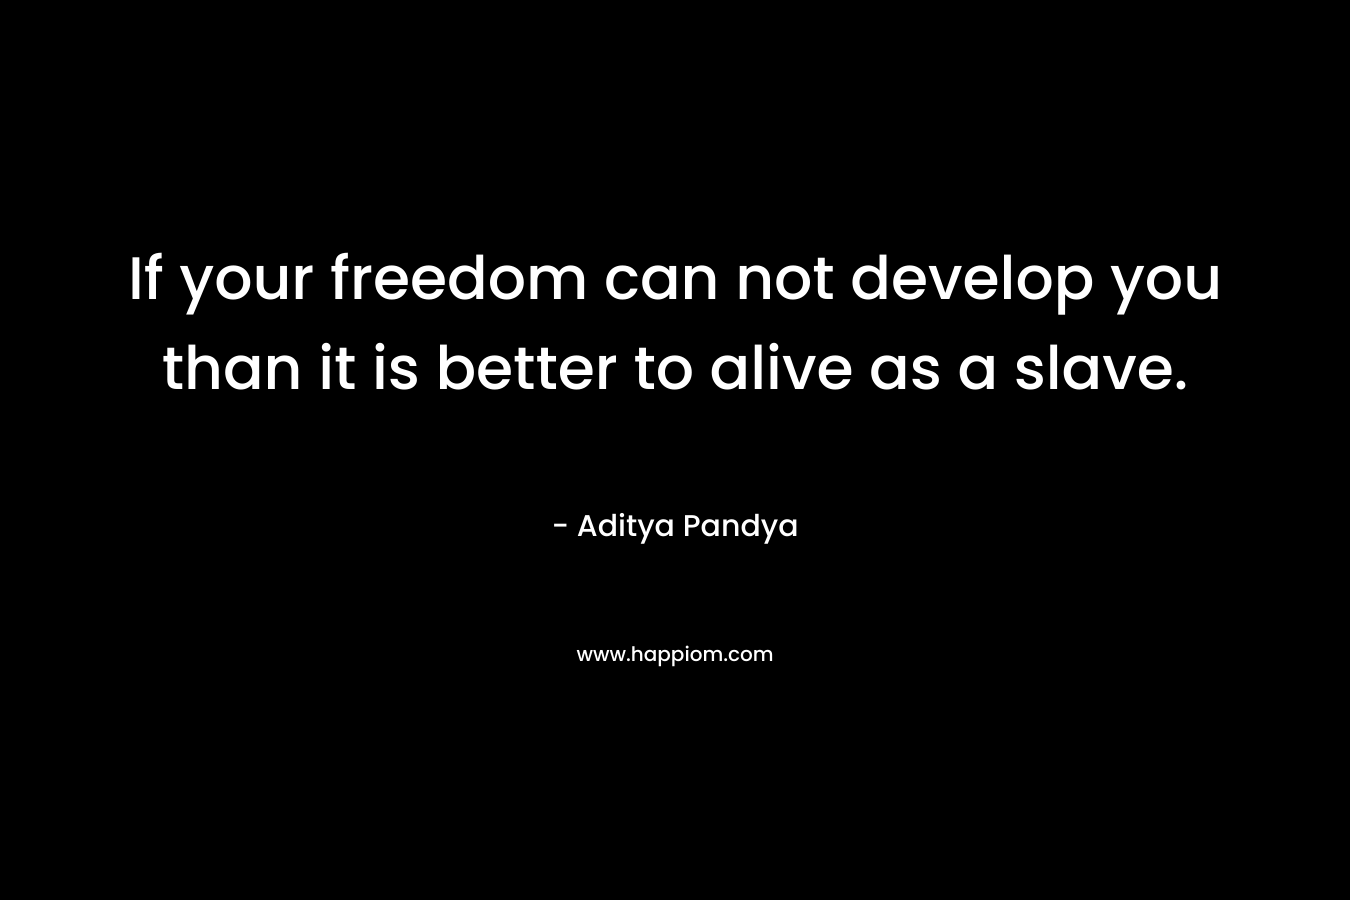 If your freedom can not develop you than it is better to alive as a slave. – Aditya Pandya